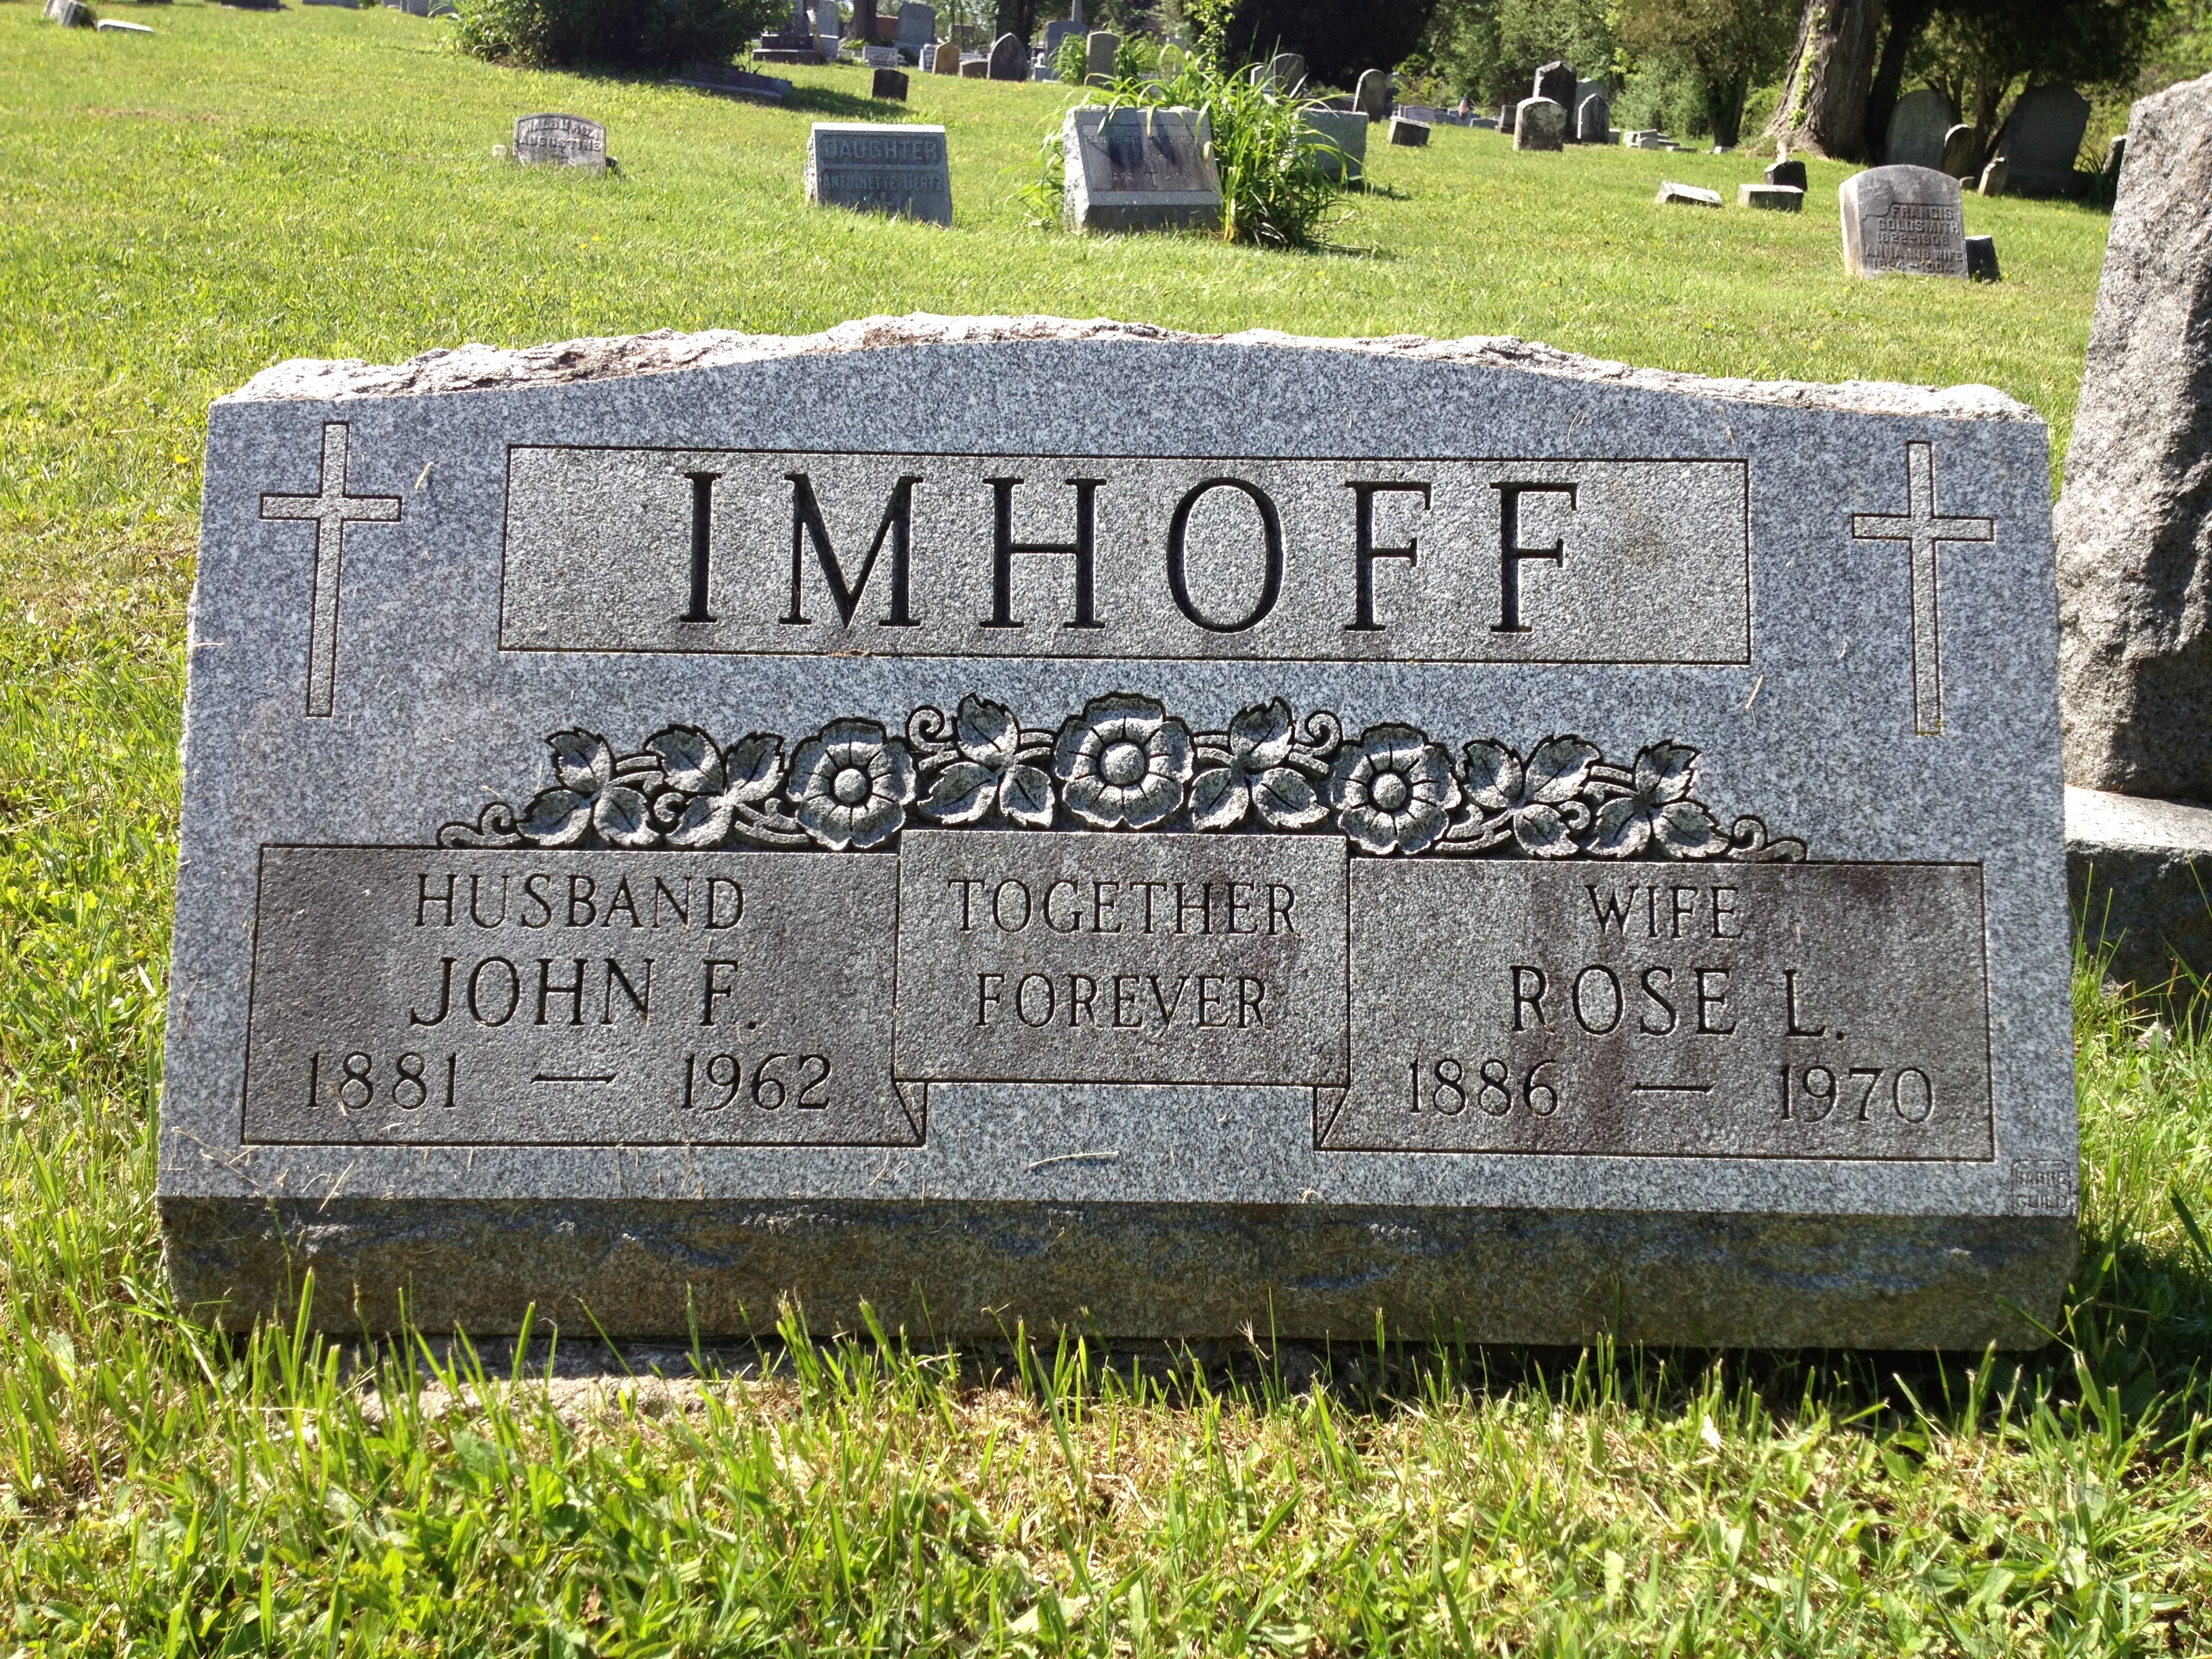 Headstone of Rose Landry and John Frederick Imhoff